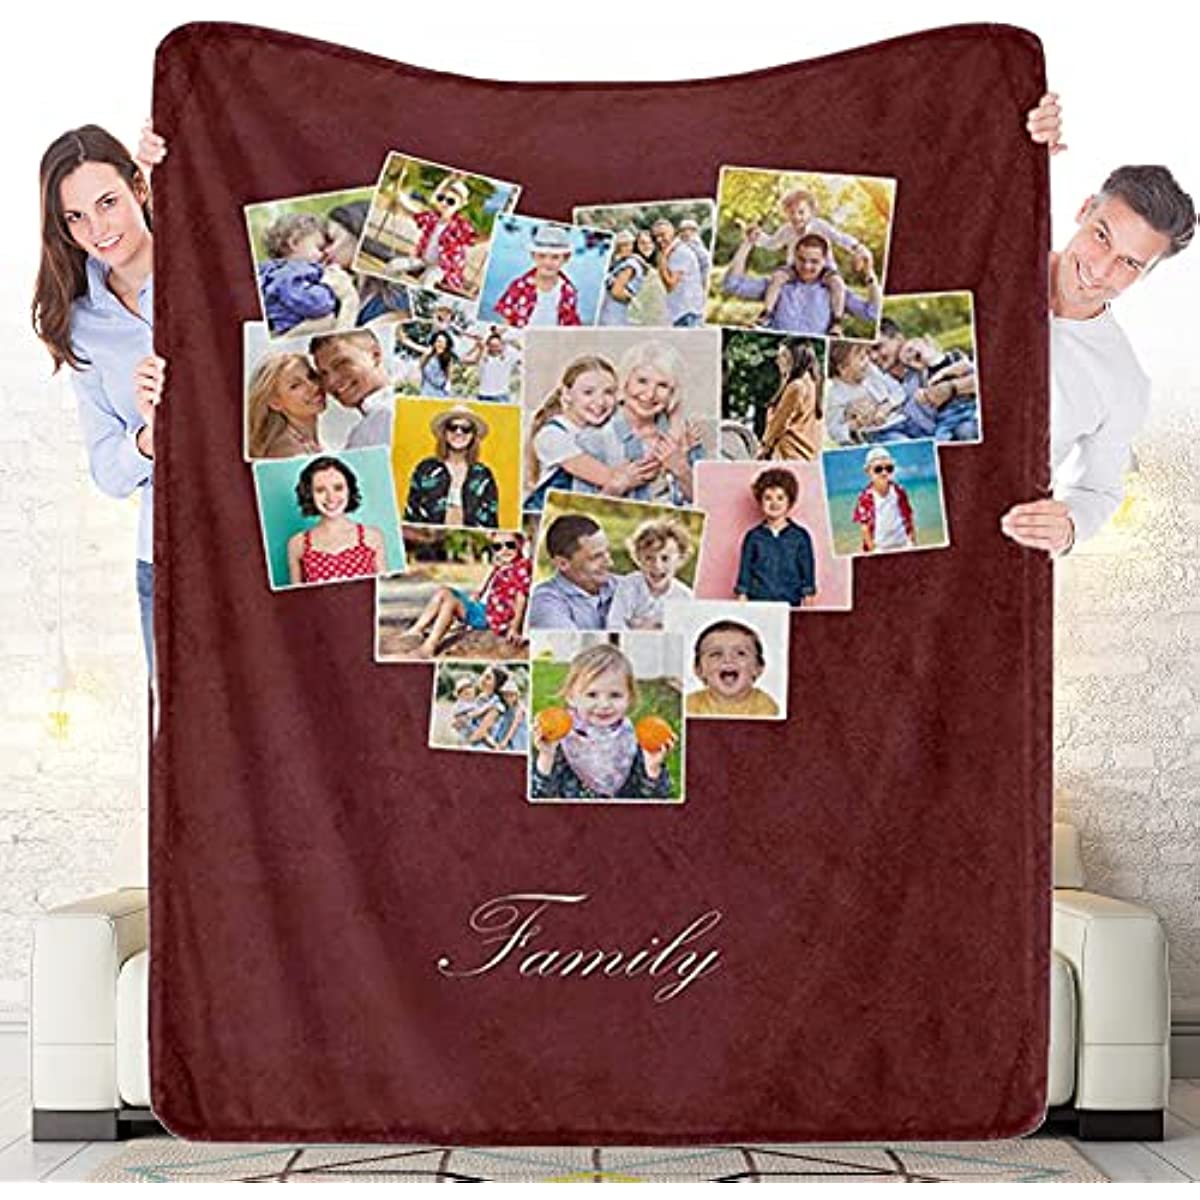 Blanket For Mom, Custom Photo Collage Blanket, Mothers Day Gift,  Personalized Blanket for Mom, Grandma Blanket, Gift For Mom, Mom Birthday